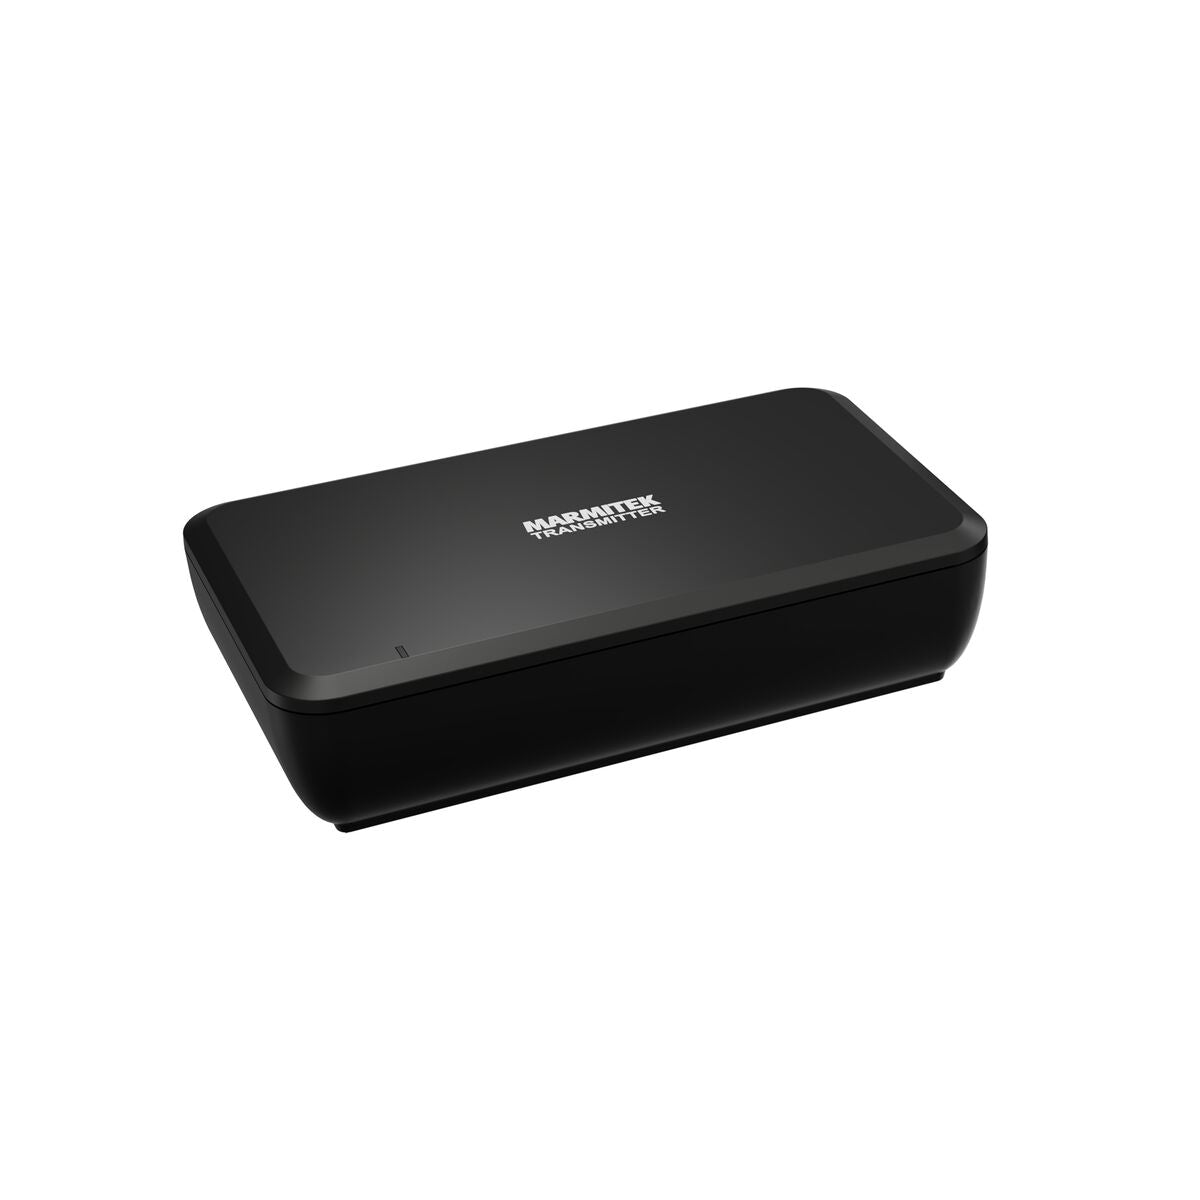 
Speaker Anywhere 650 - Wireless speakers connection 